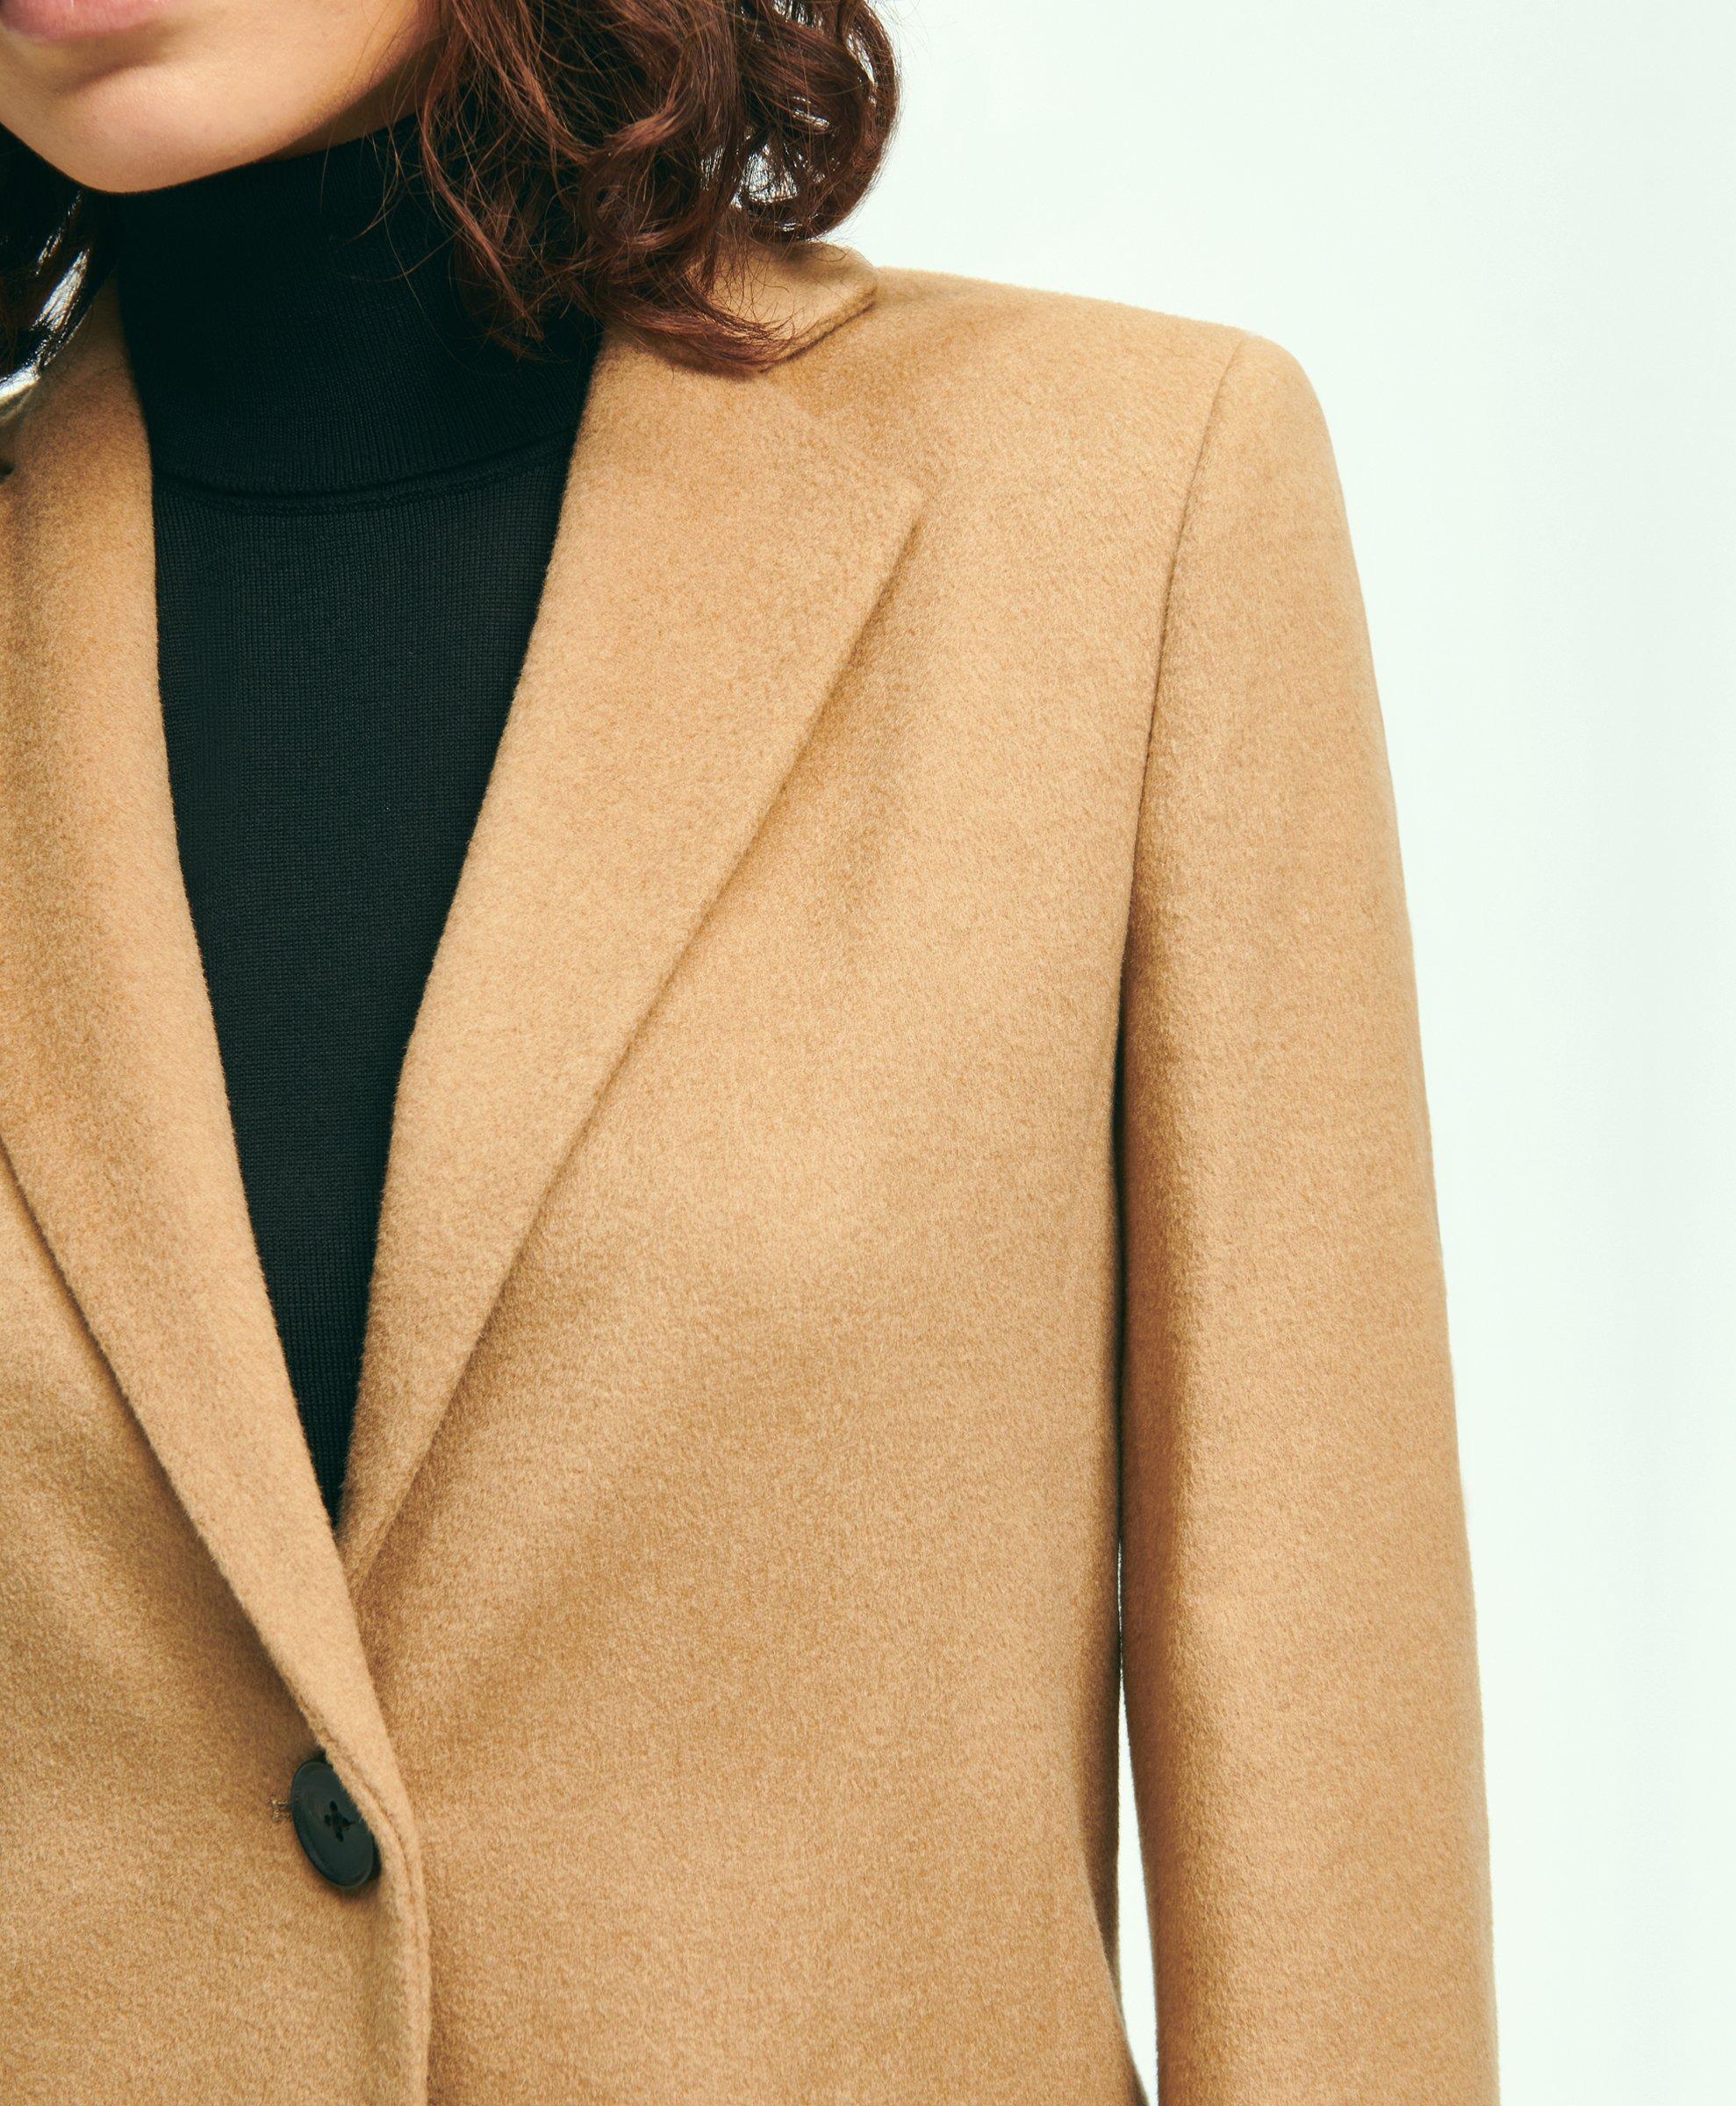 Double-faced button-up camel wool coat